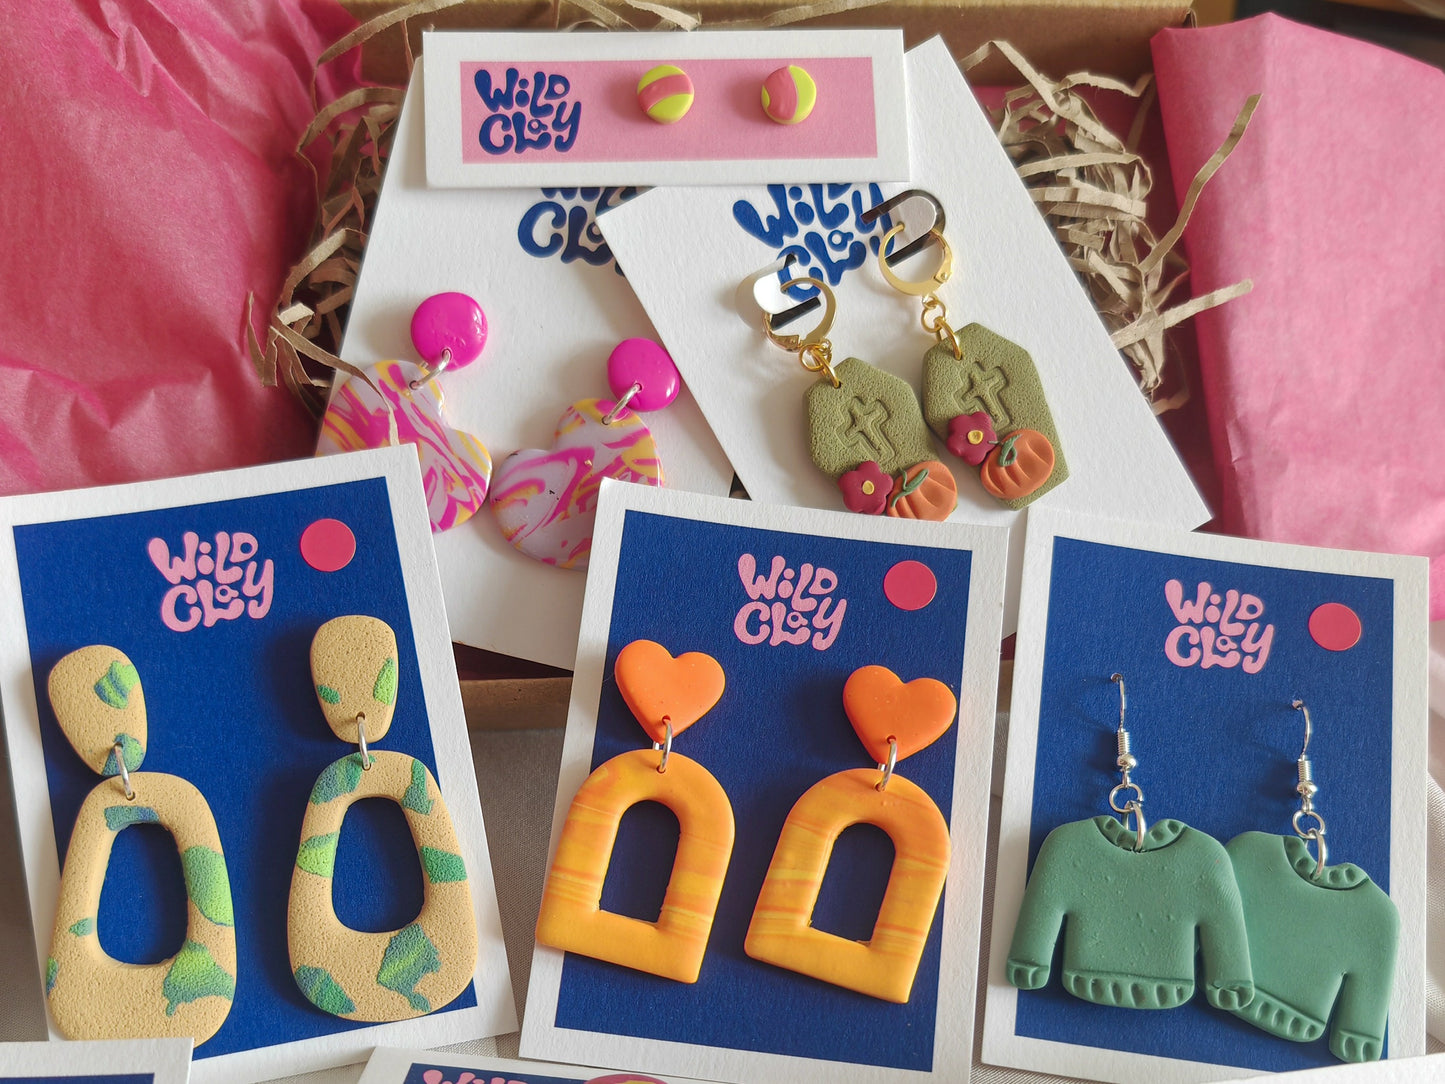 Pick Your Aesthetic: Wild Clay Mystery Box - 2 Dangles, 1 Studs, 1 Surprise Gift